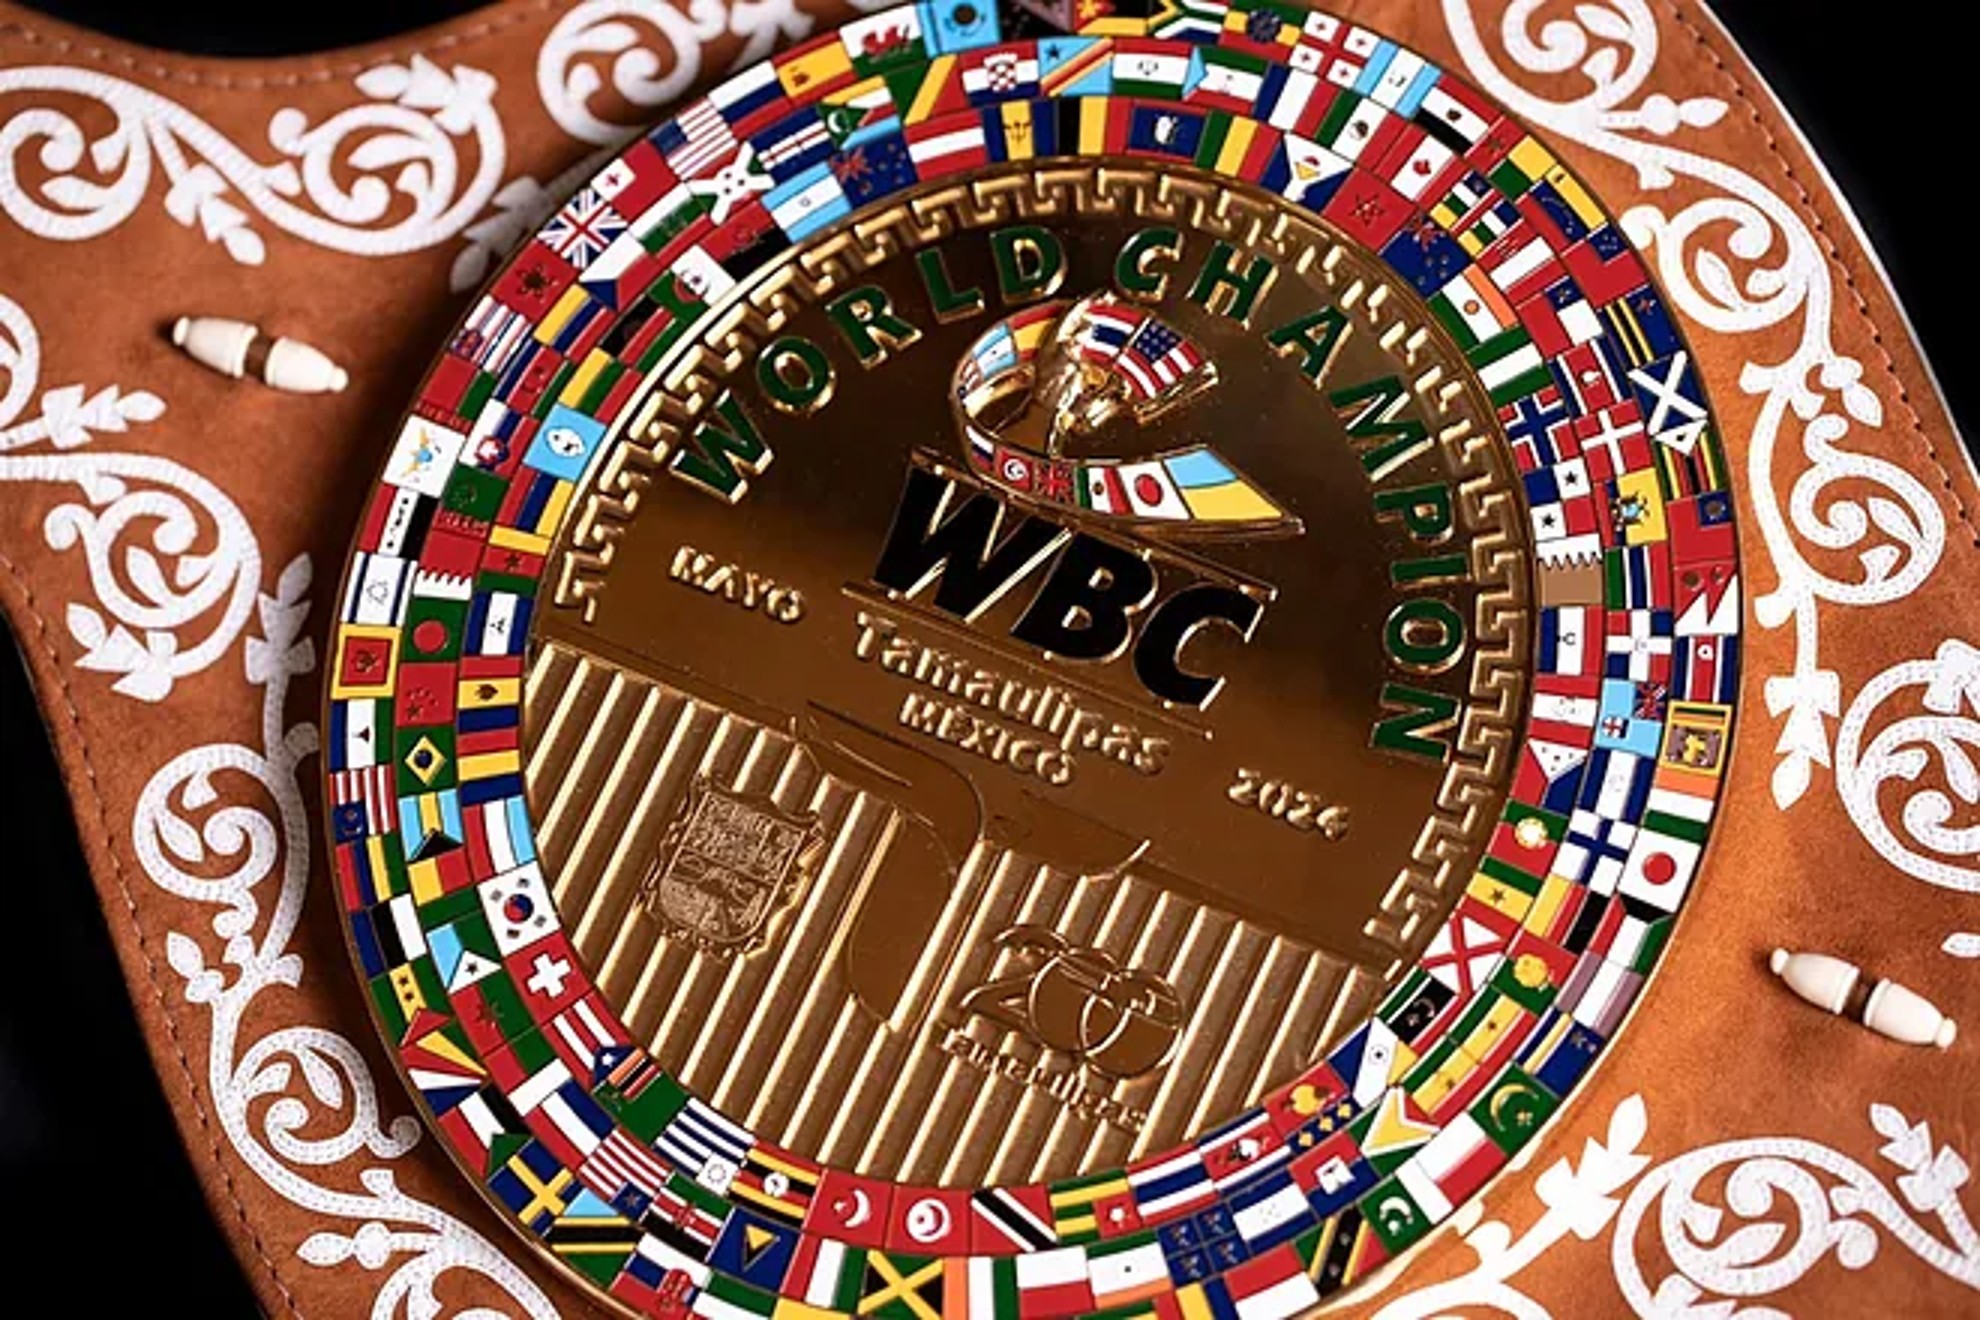 Canelo vs Munguia: WBC presents belt with references to Tamaulipas for the winner